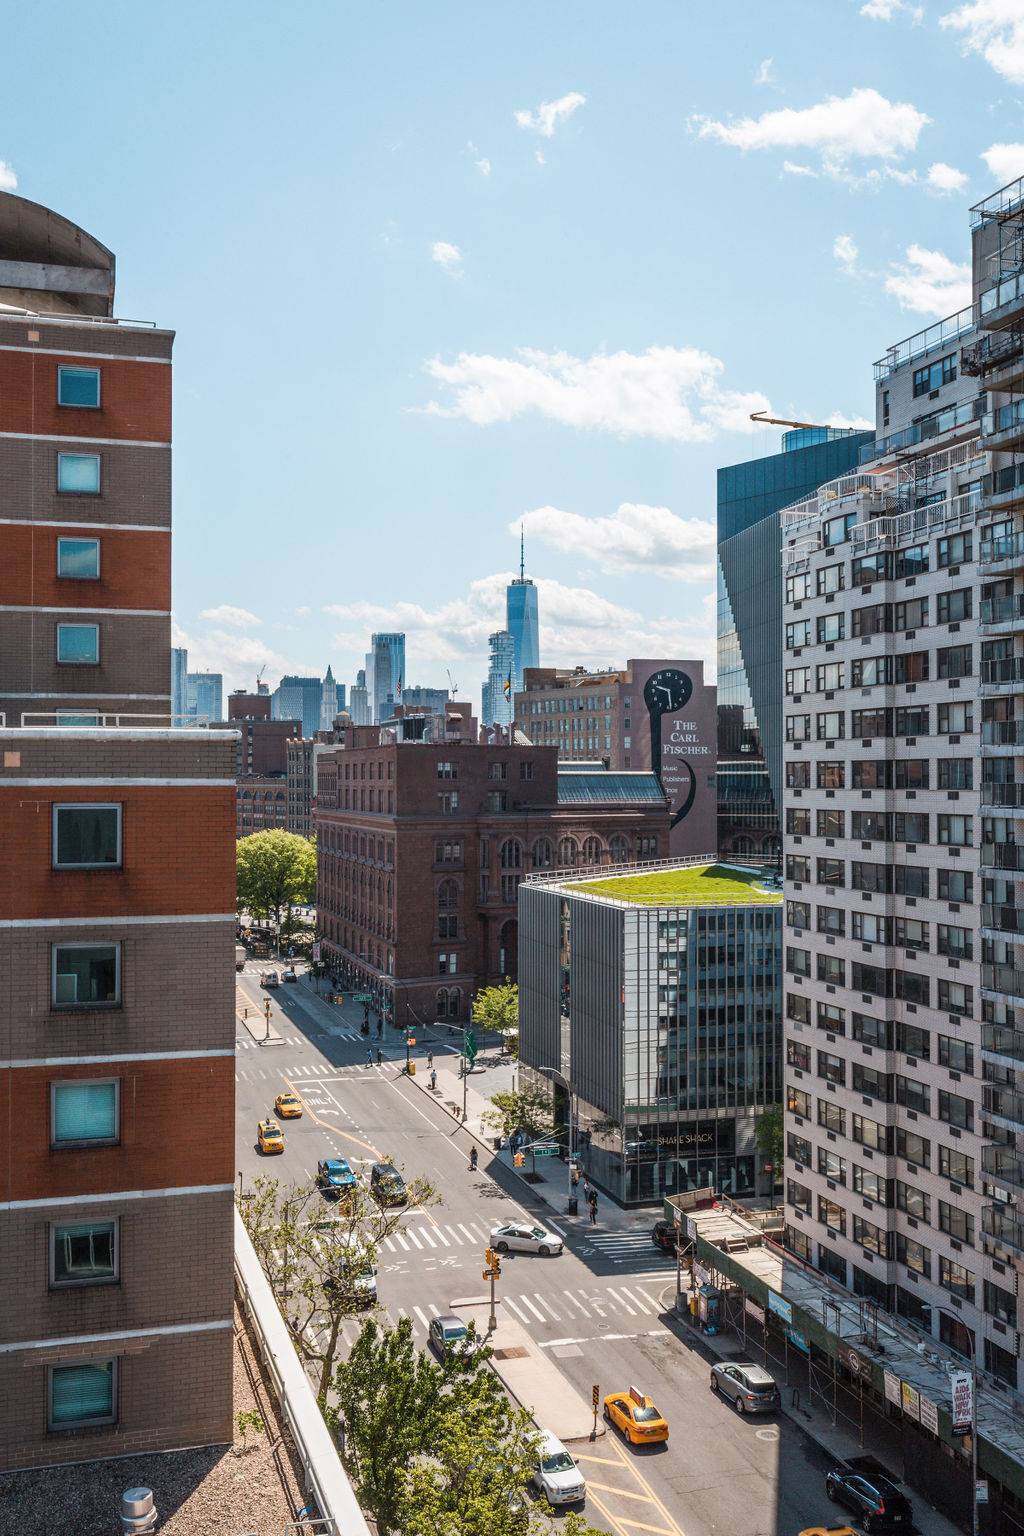 Beautiful 2 bedroom, 2bath residence featuring a Private Terrace, stainless steel appliances, in unit washer dryer, marble bathrooms, and spacious closets with open West facing views.